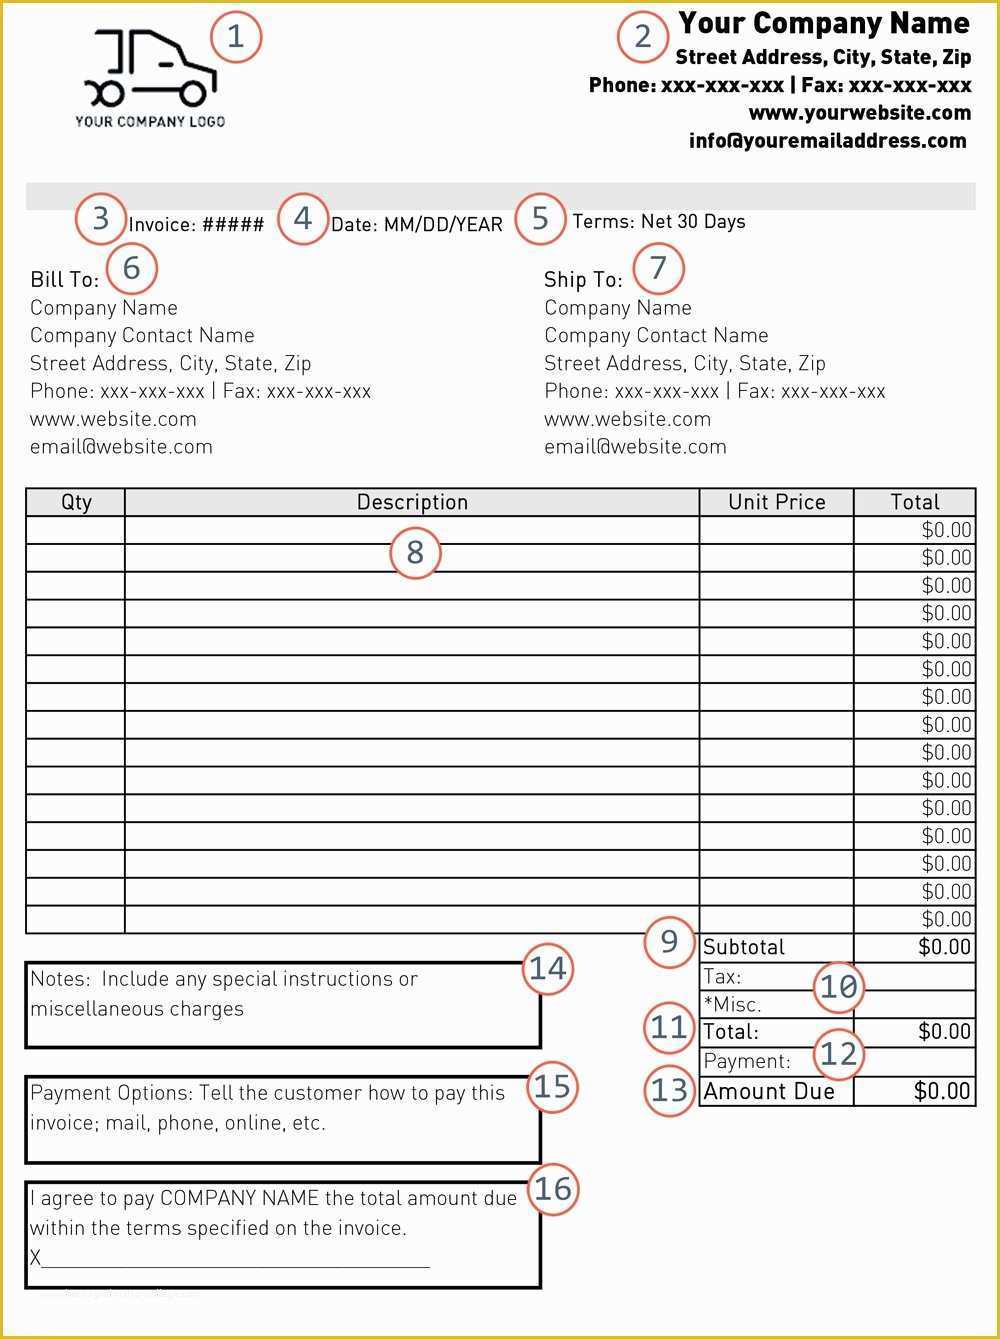 Free Company Invoice Template Of Trucking Invoice Template Free Invoice Template Ideas